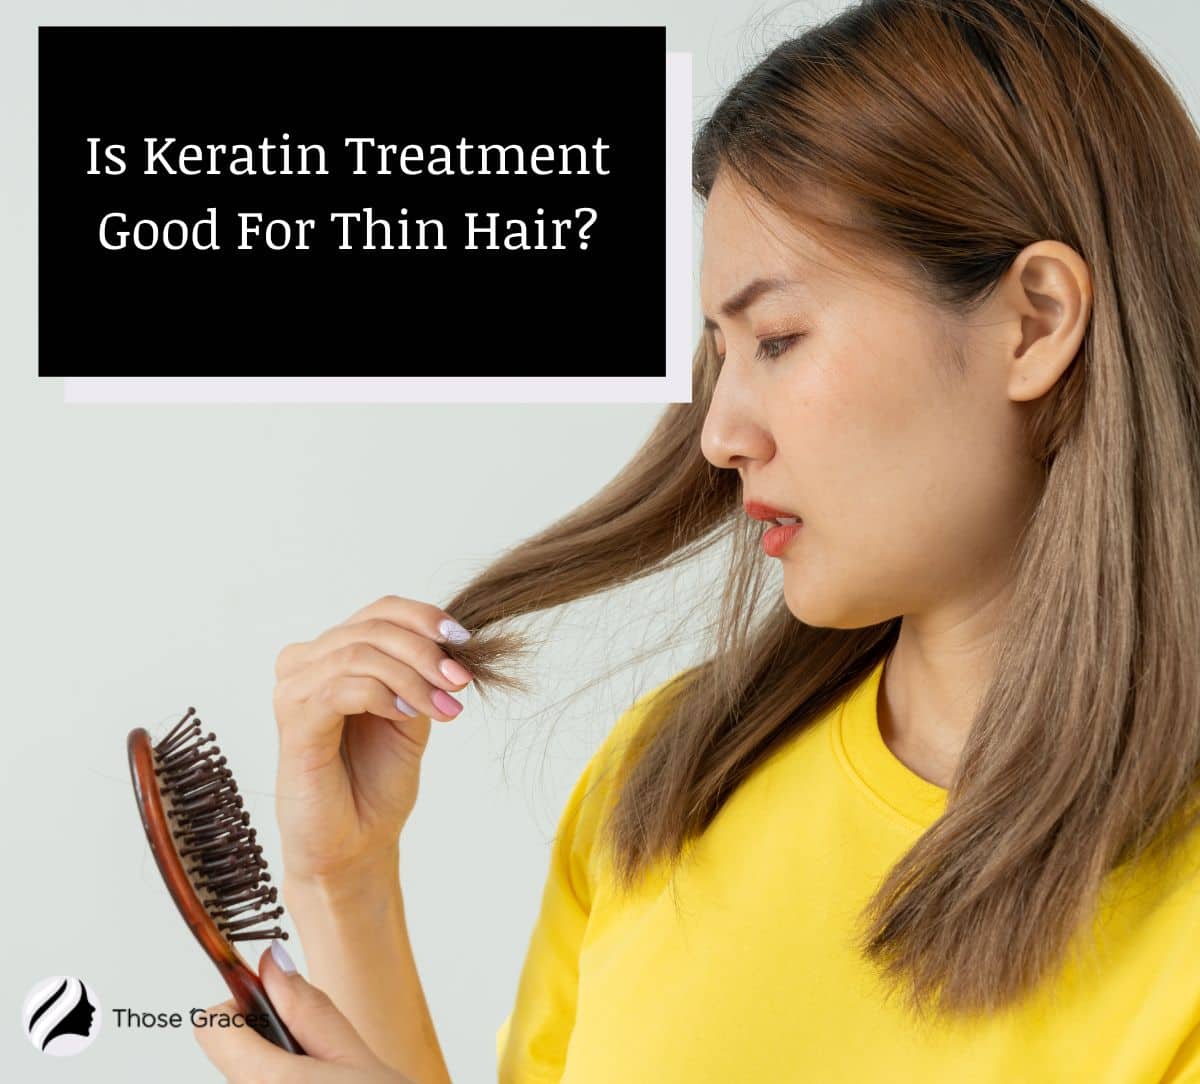 Lady brushing her hair and wondering Is Keratin Treatment Good For Thin Hair?